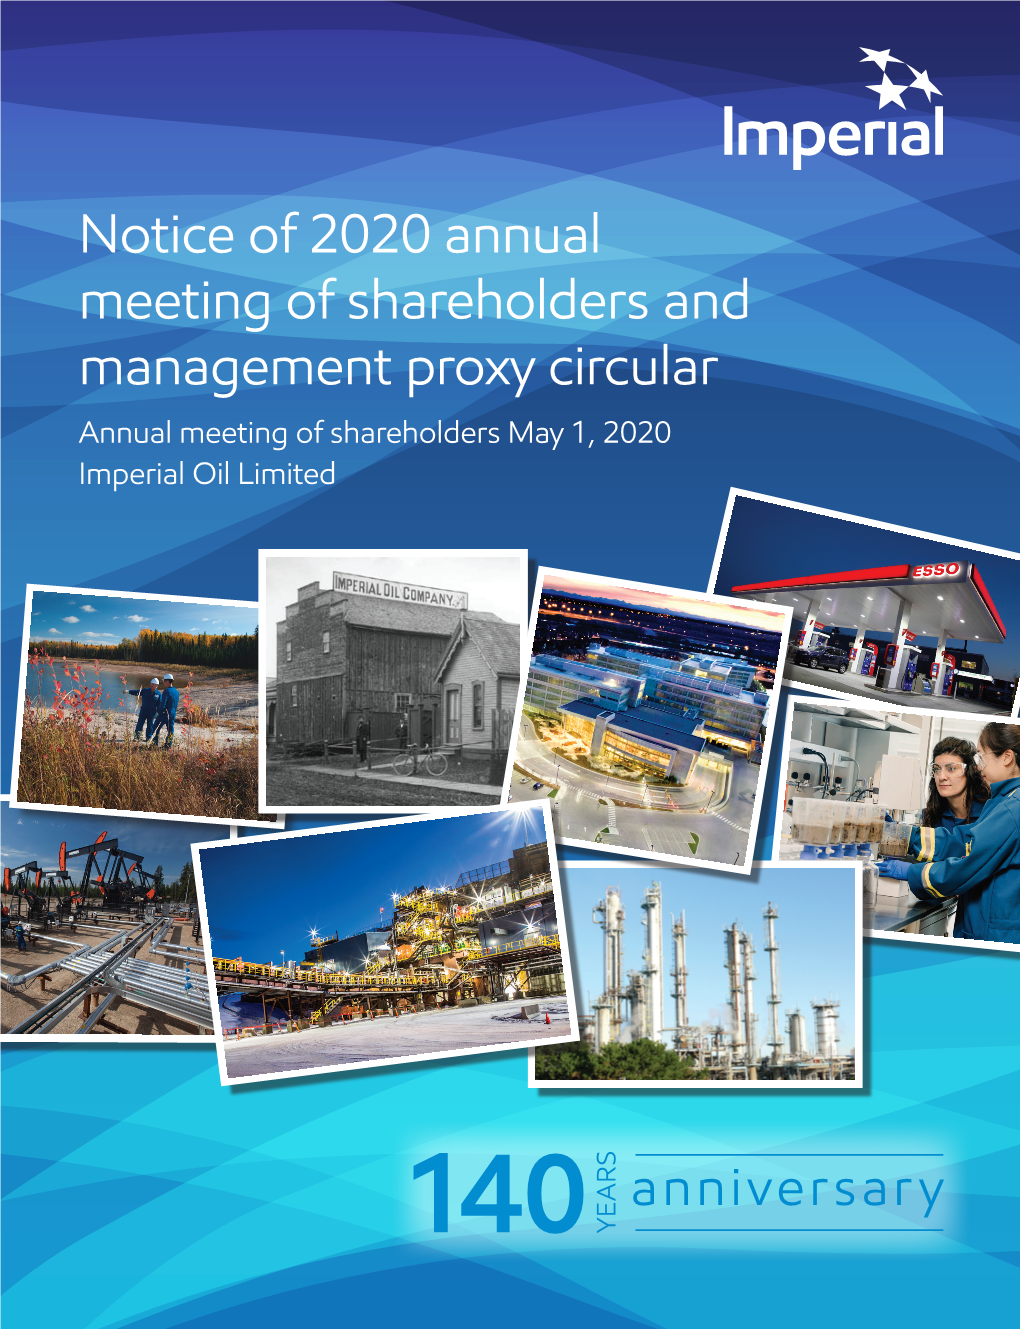 Notice of 2020 Annual Meeting of Shareholders and Management Proxy Circular Annual Meeting of Shareholders May 1, 2020 Imperial Oil Limited